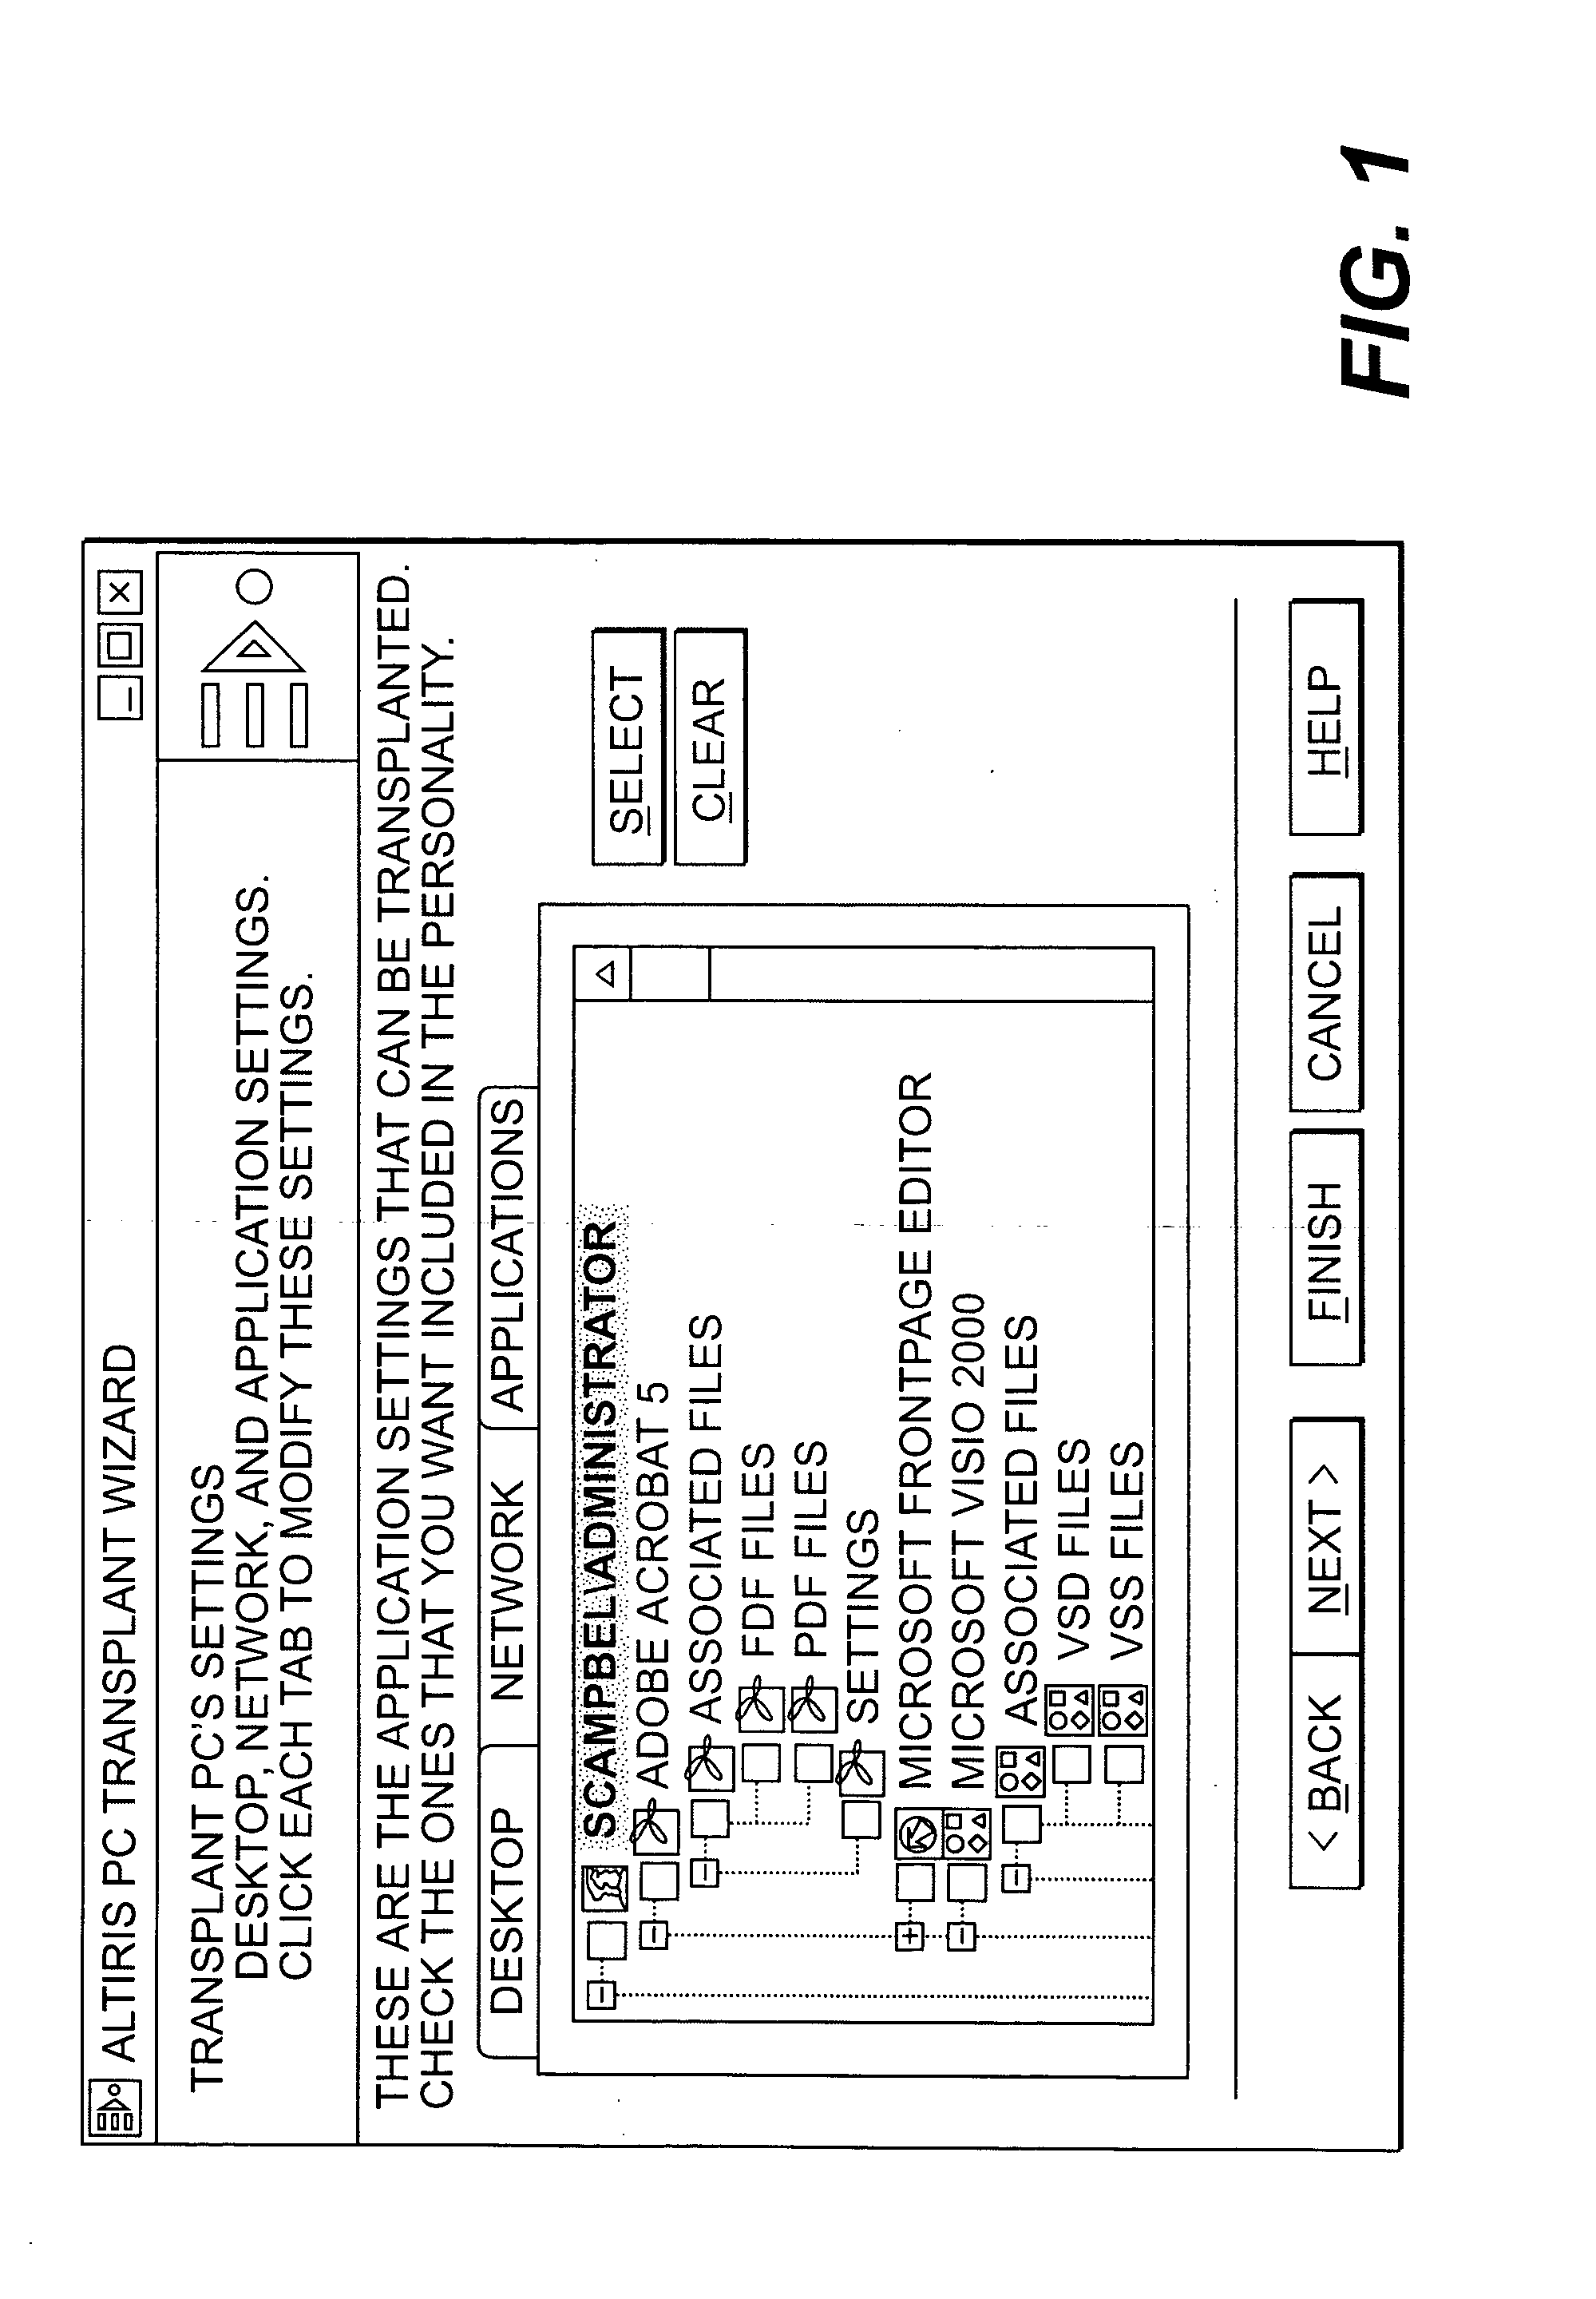 Method, system and article of manufacture for data preservation and automated electronic software distribution across an enterprise system